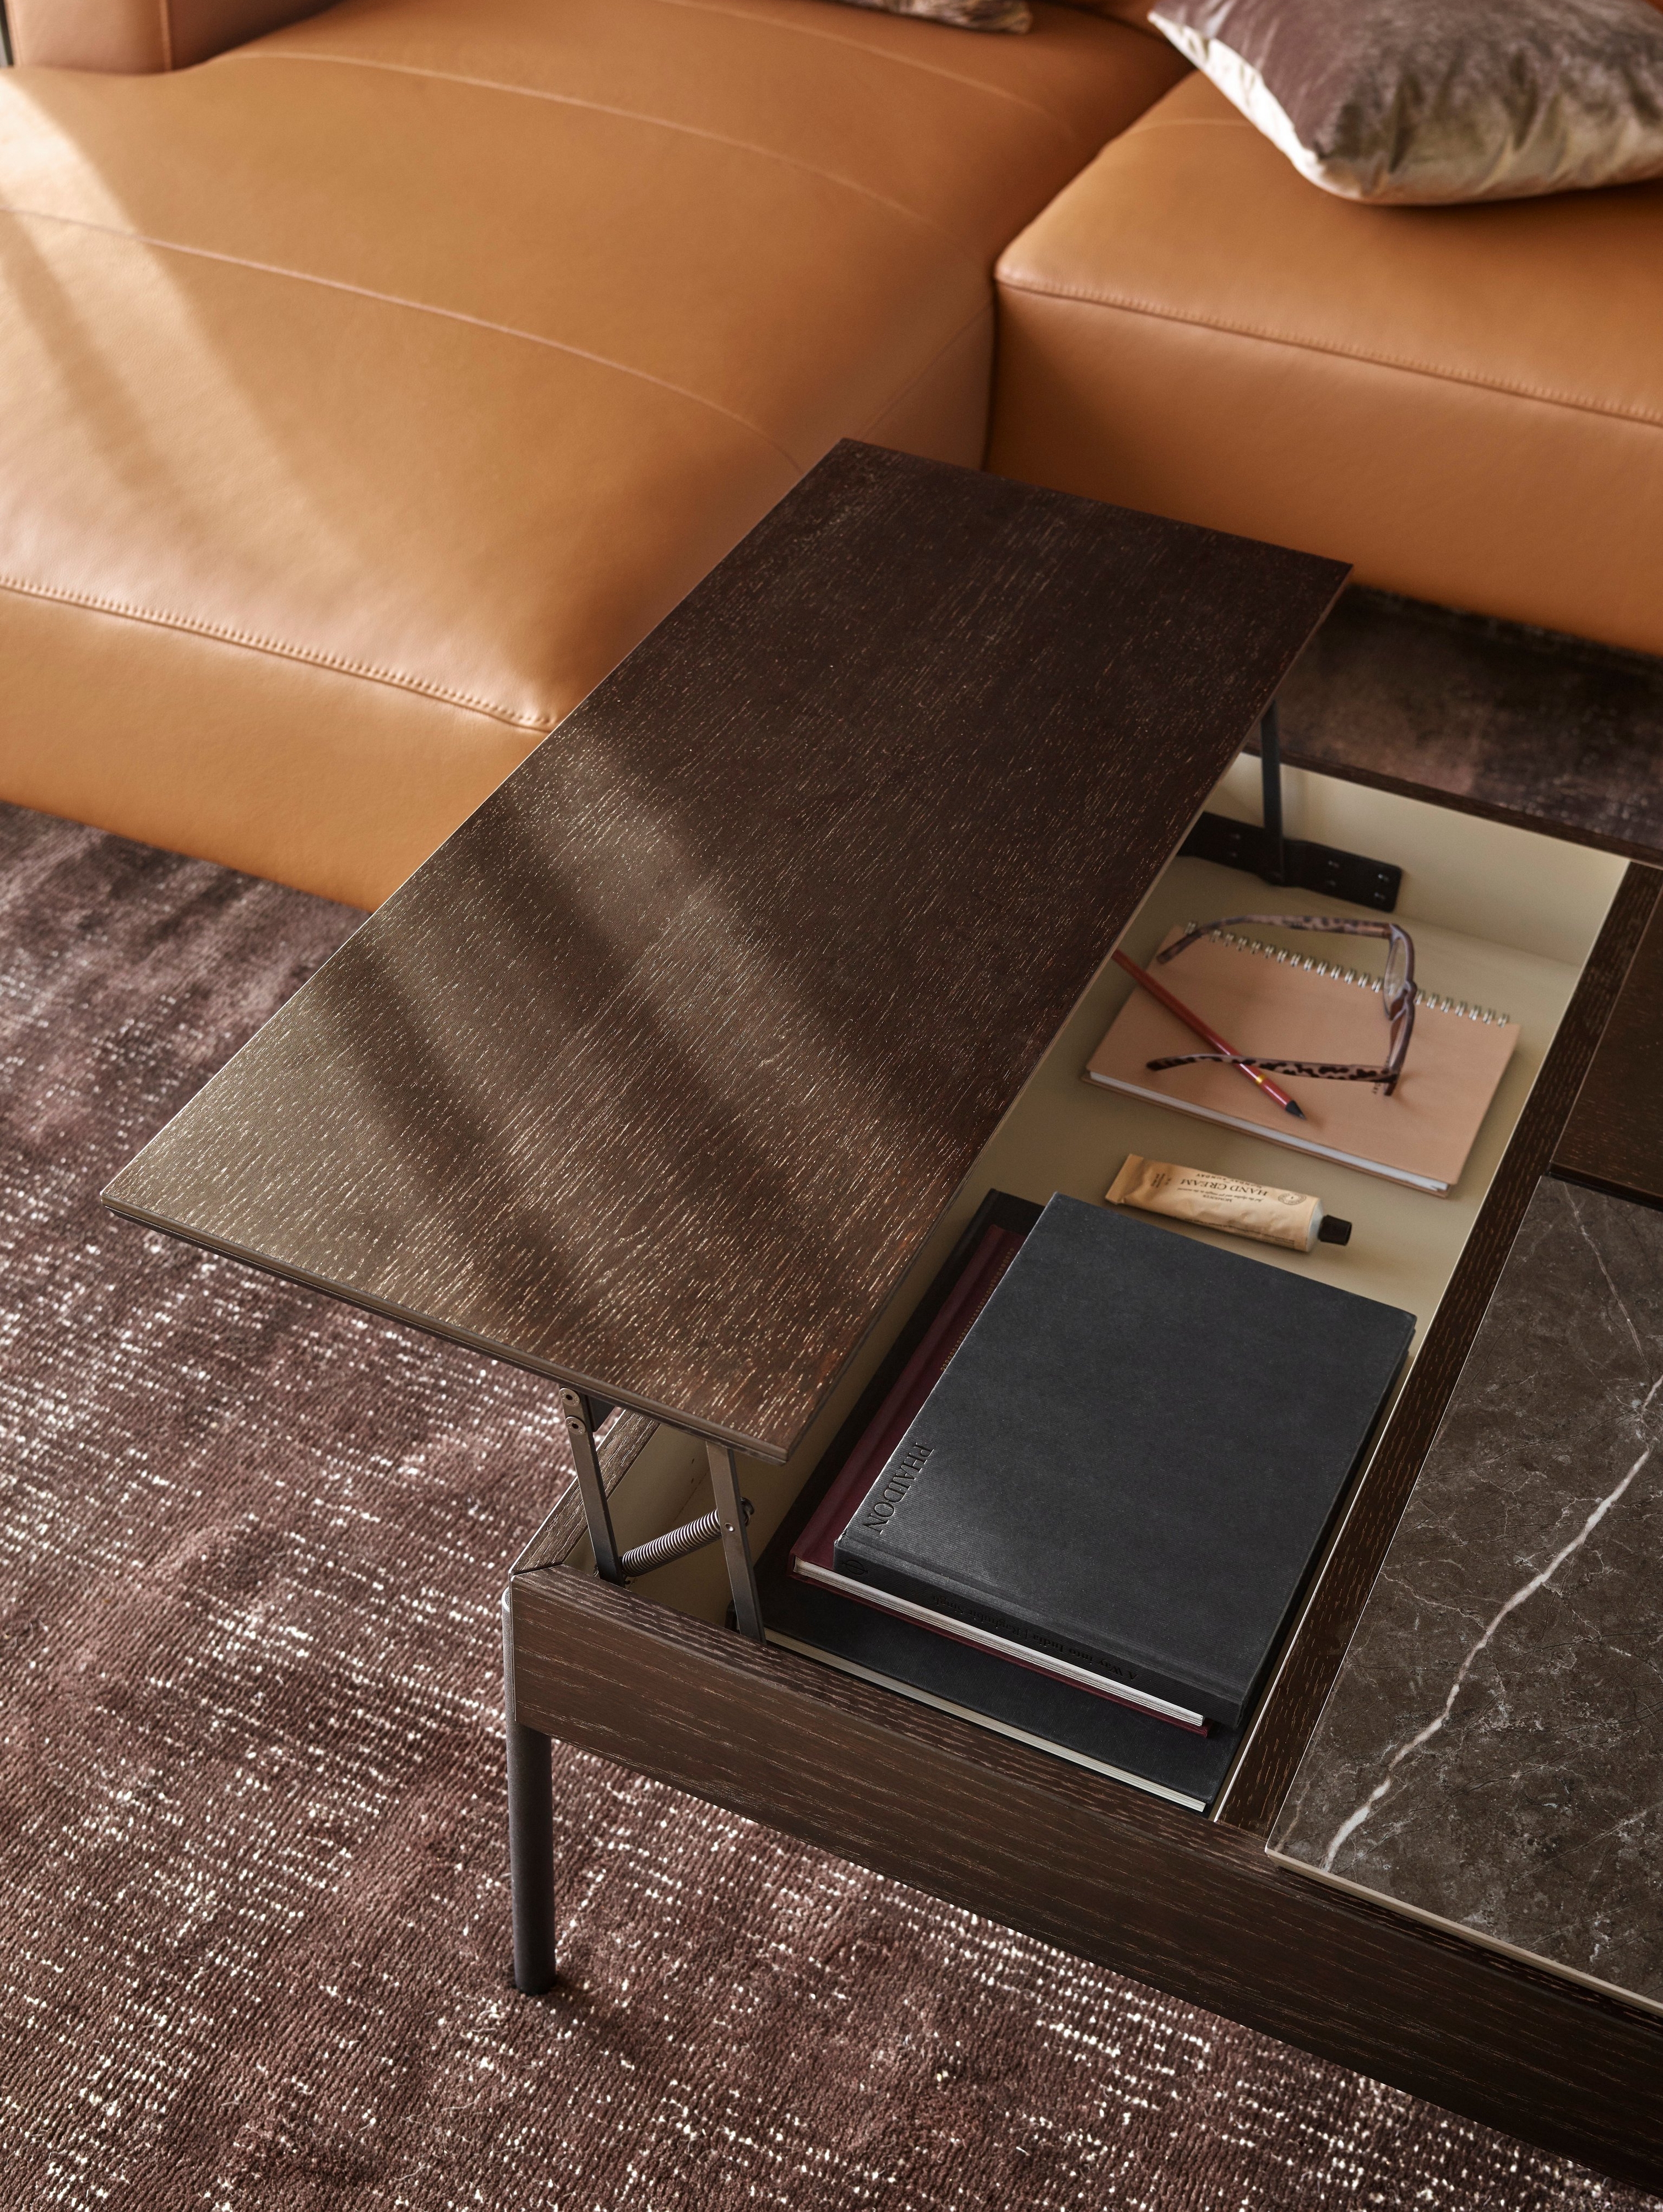 Close-up of a modern Chiva coffee table with books and accessories, near a tan leather sofa.